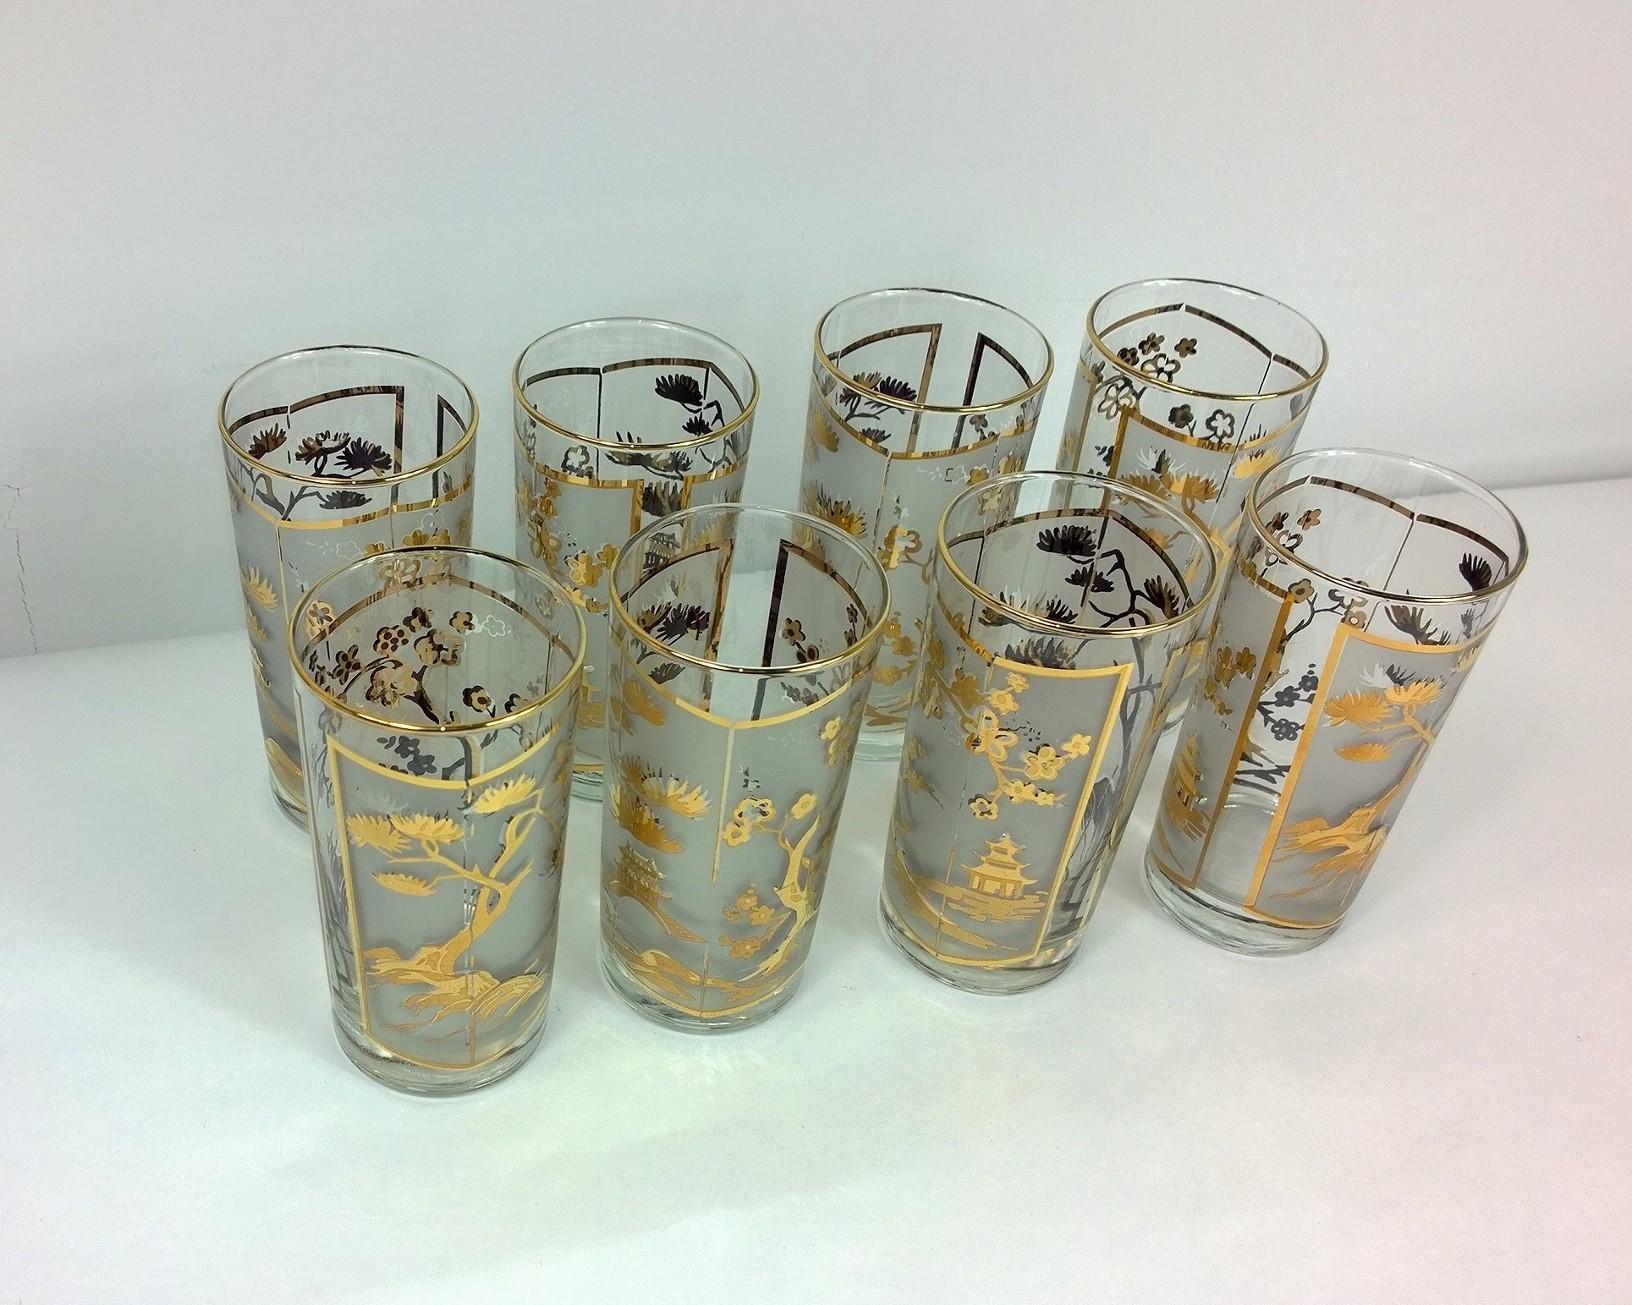 Offered is a set of eight Mid-Century Modern Fred Press style gold gilt on a frosted overlay print pattern Asian / chinoiserie themed (cherry blossom trees and pagodas) clear cocktail glasses. The gilt chinoiserie images on frosted and clear glass